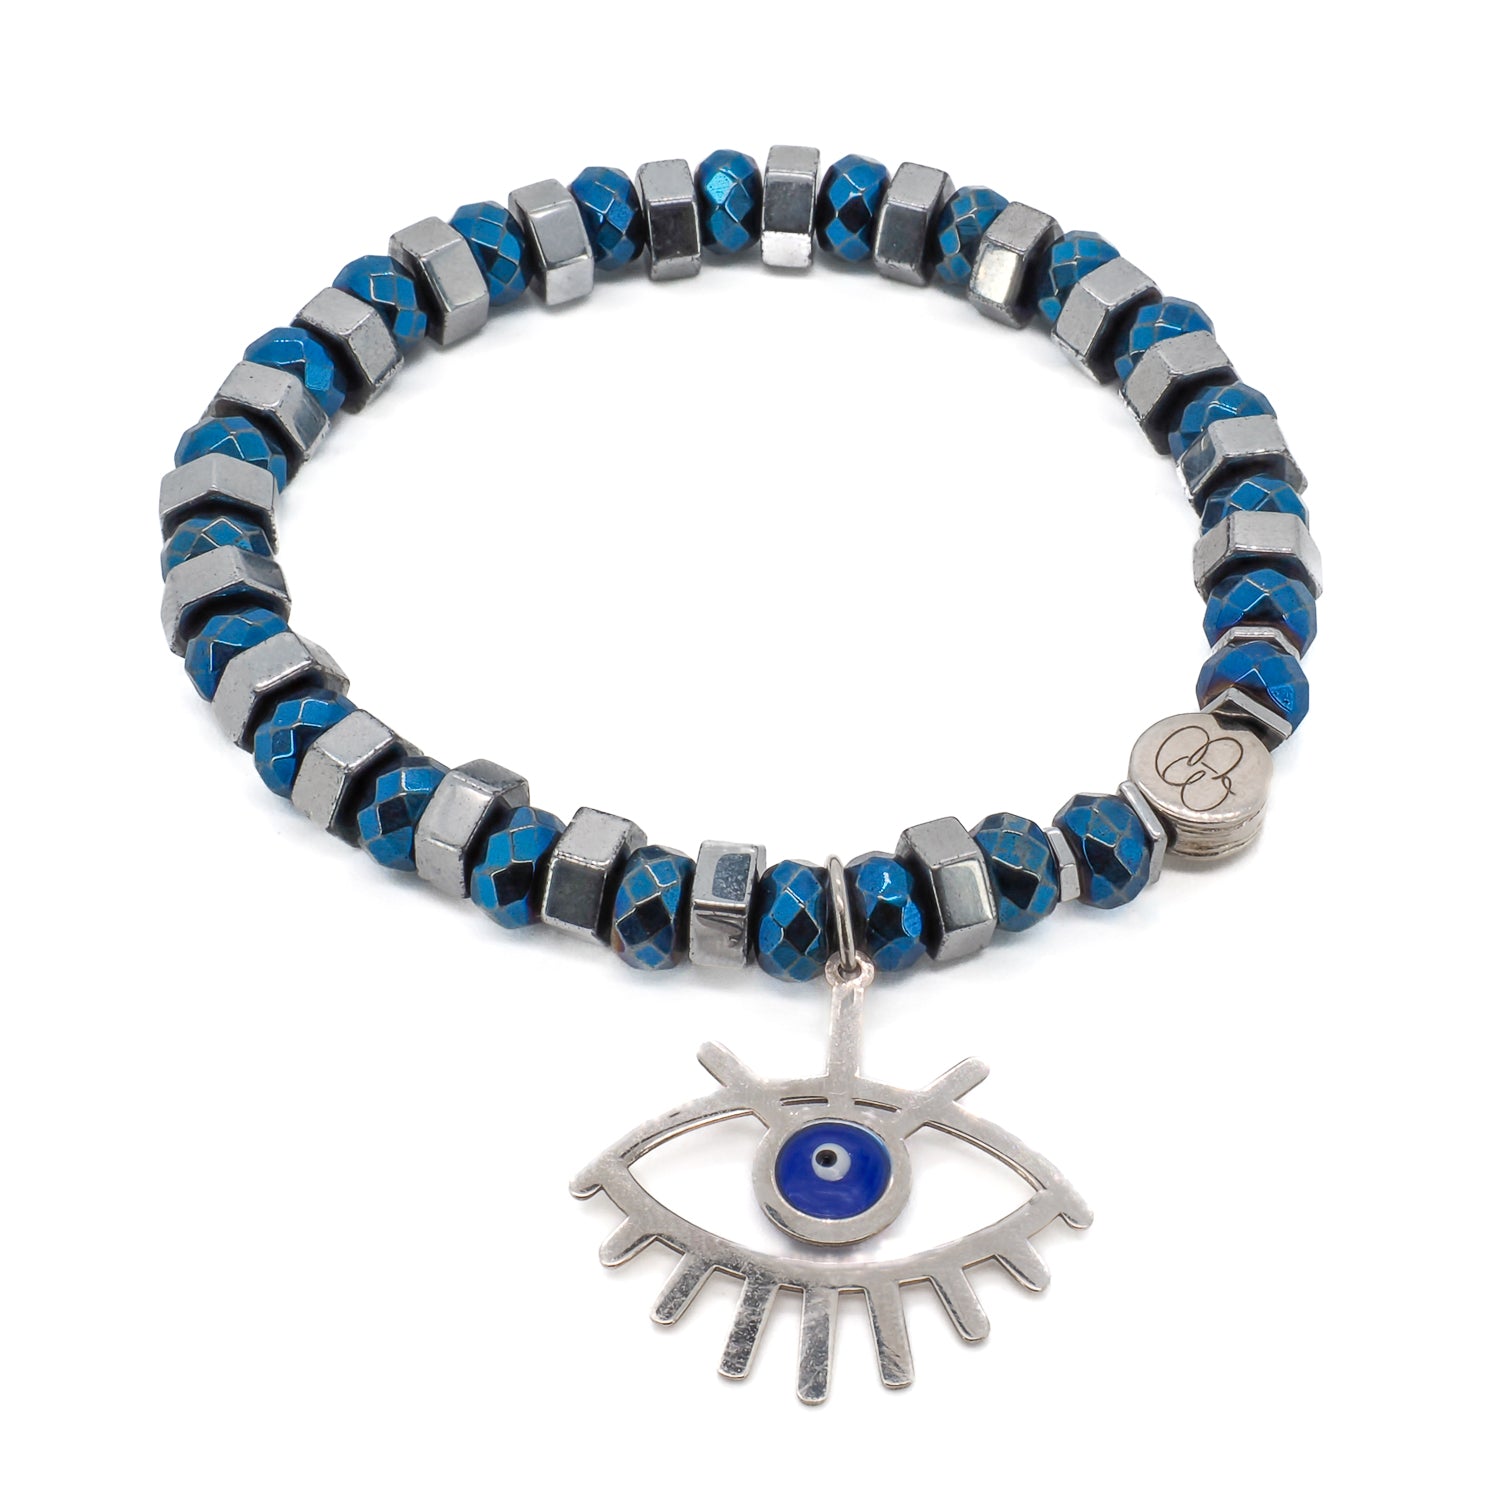 Discover the protective and stylish Nazar Bracelet, featuring a combination of handmade blue and silver hematite stones.